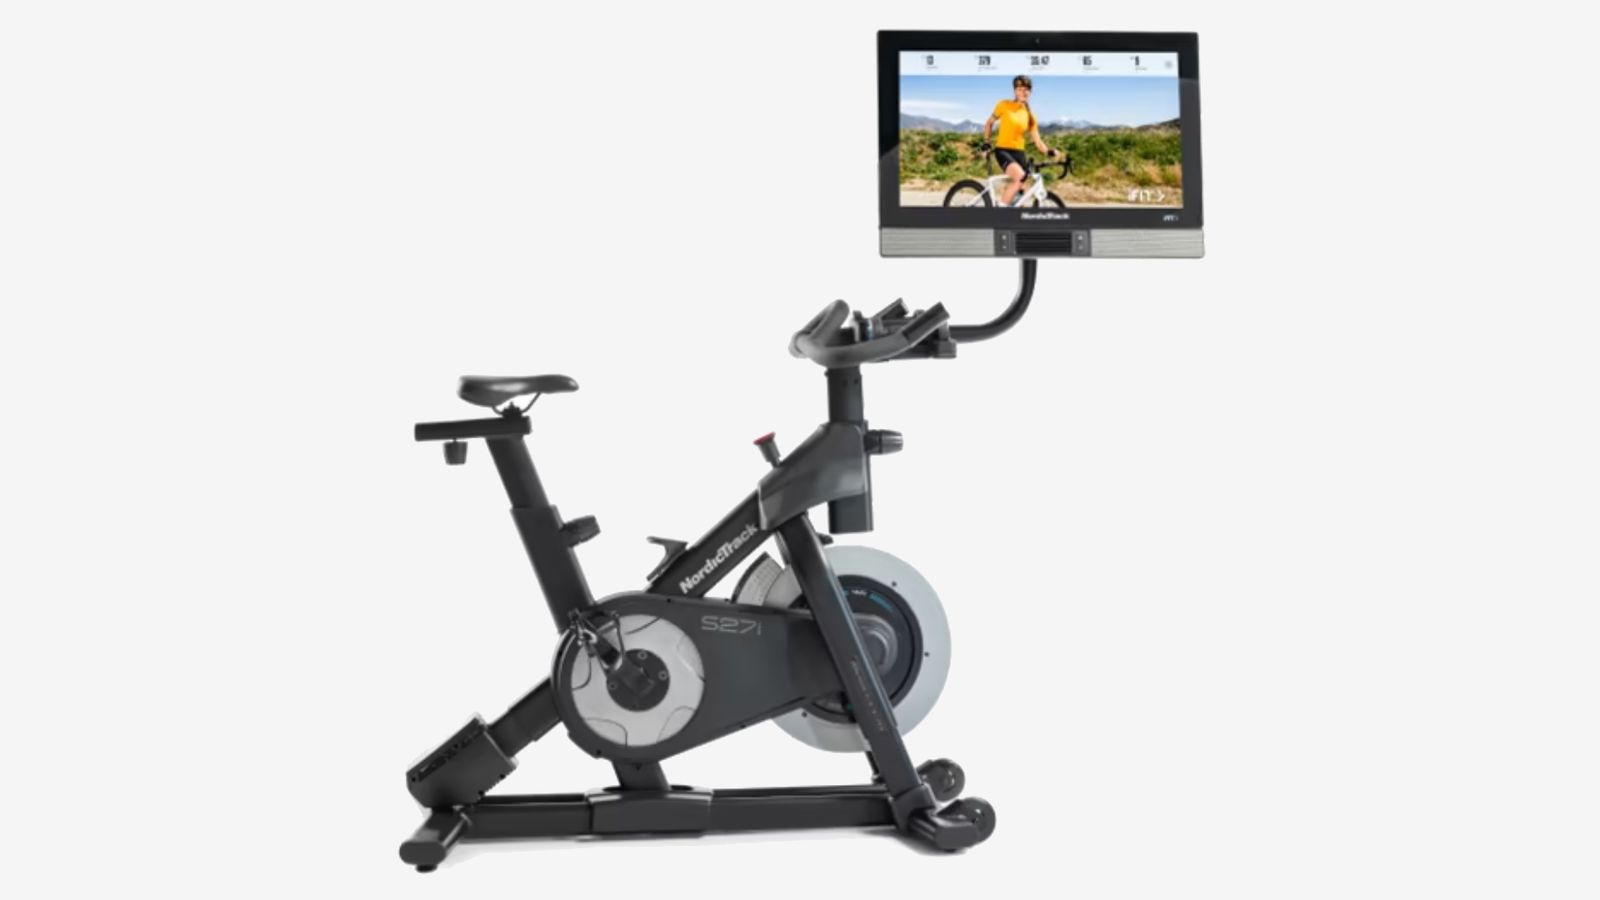 NordicTrack S27i Studio product image of a grey spin bike with a large heads-up screen with an image of someone in a yellow shirt on the display.